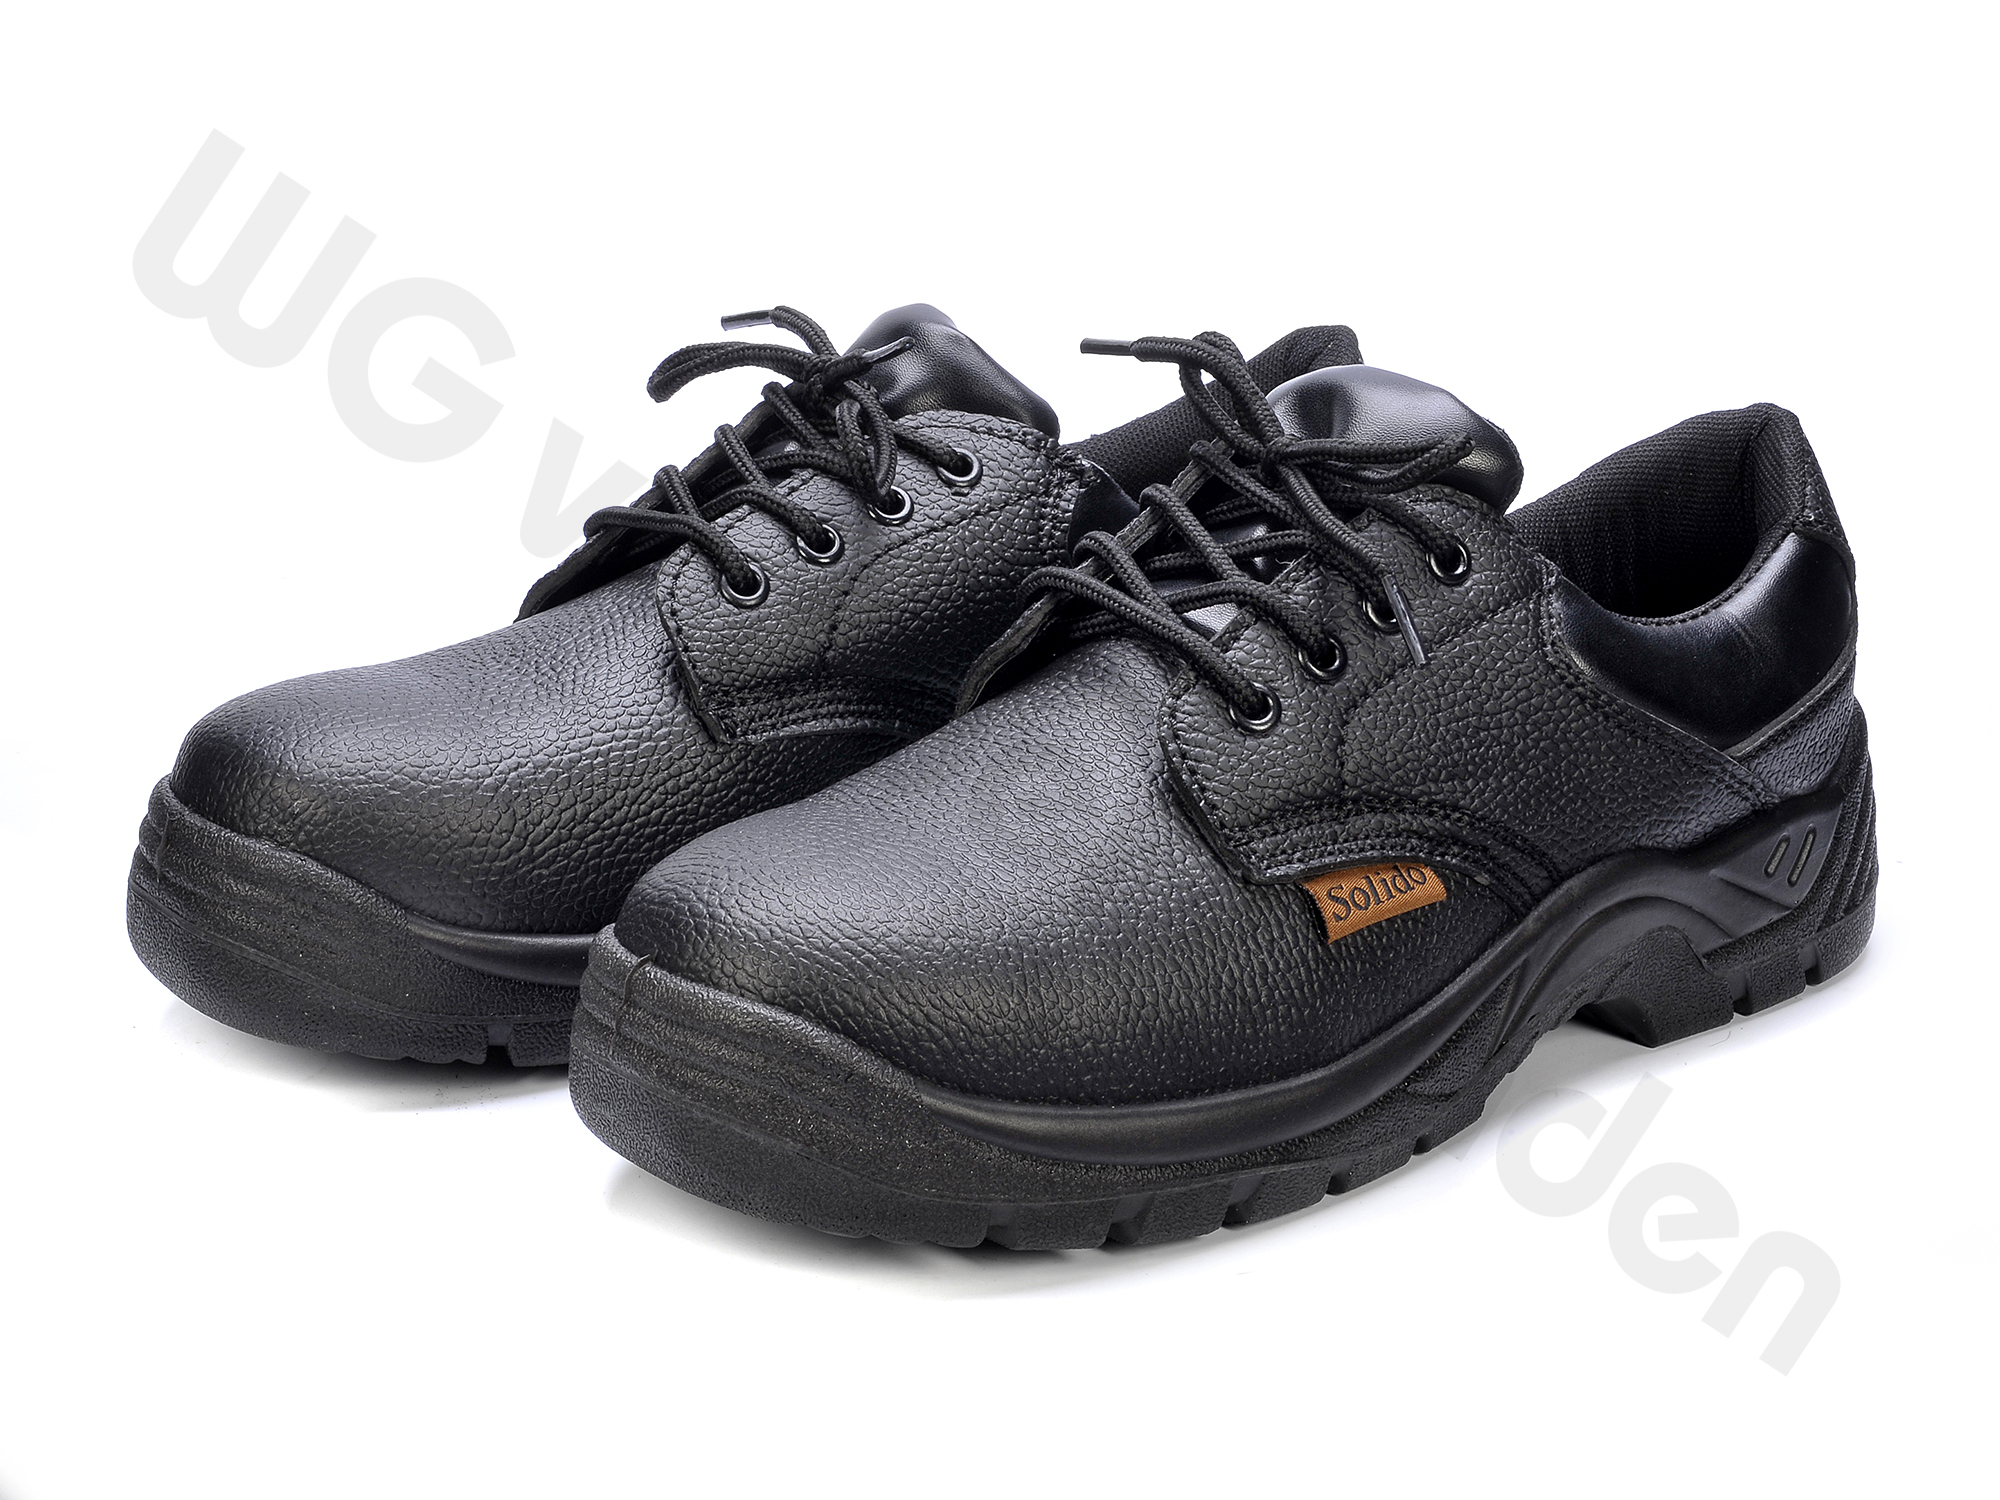 880606 SHOES SAFETY S1 WITH STEEL TOE SIZE 43 / 27.5CM CE